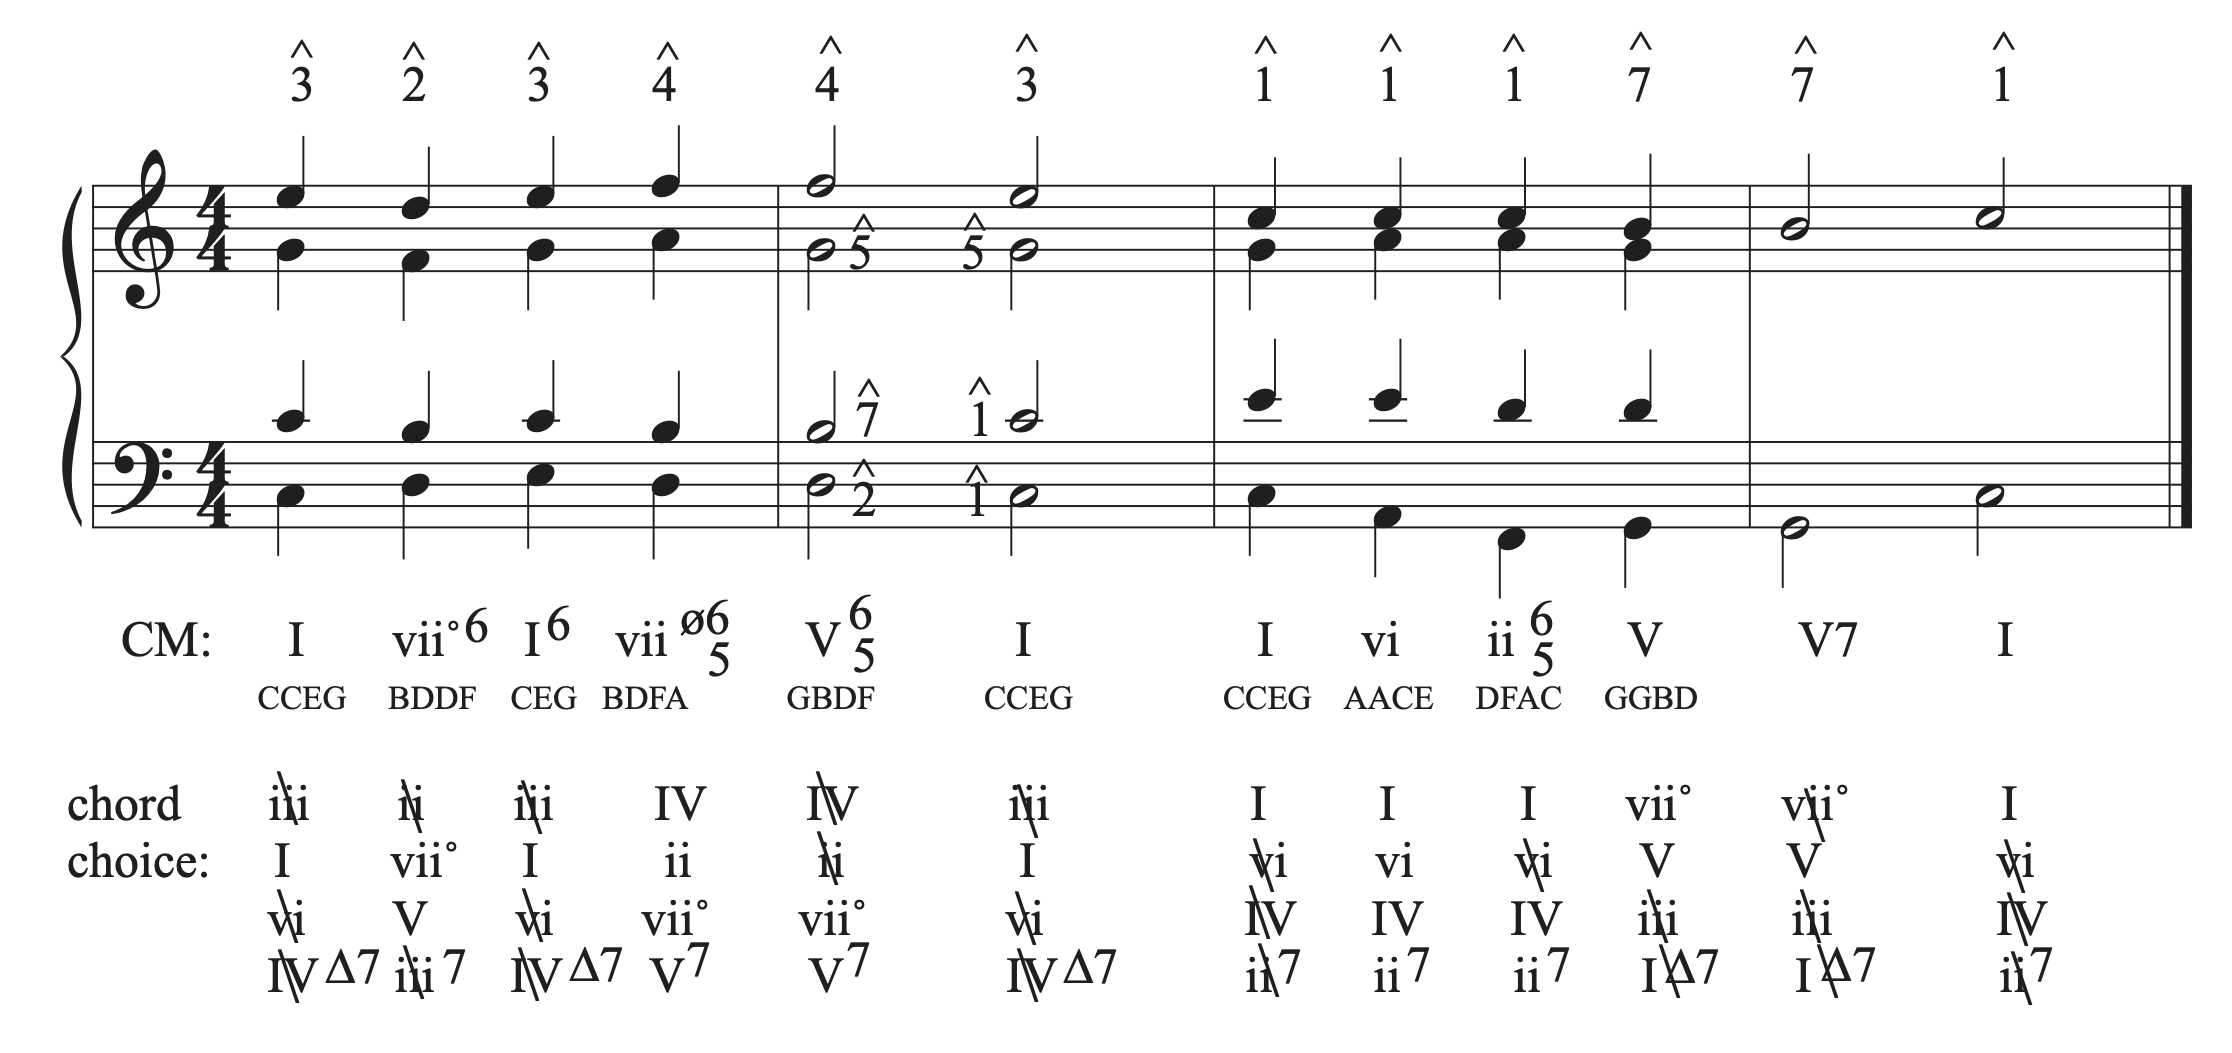 The musical example in C major with the alto and tenor added to bar 3.